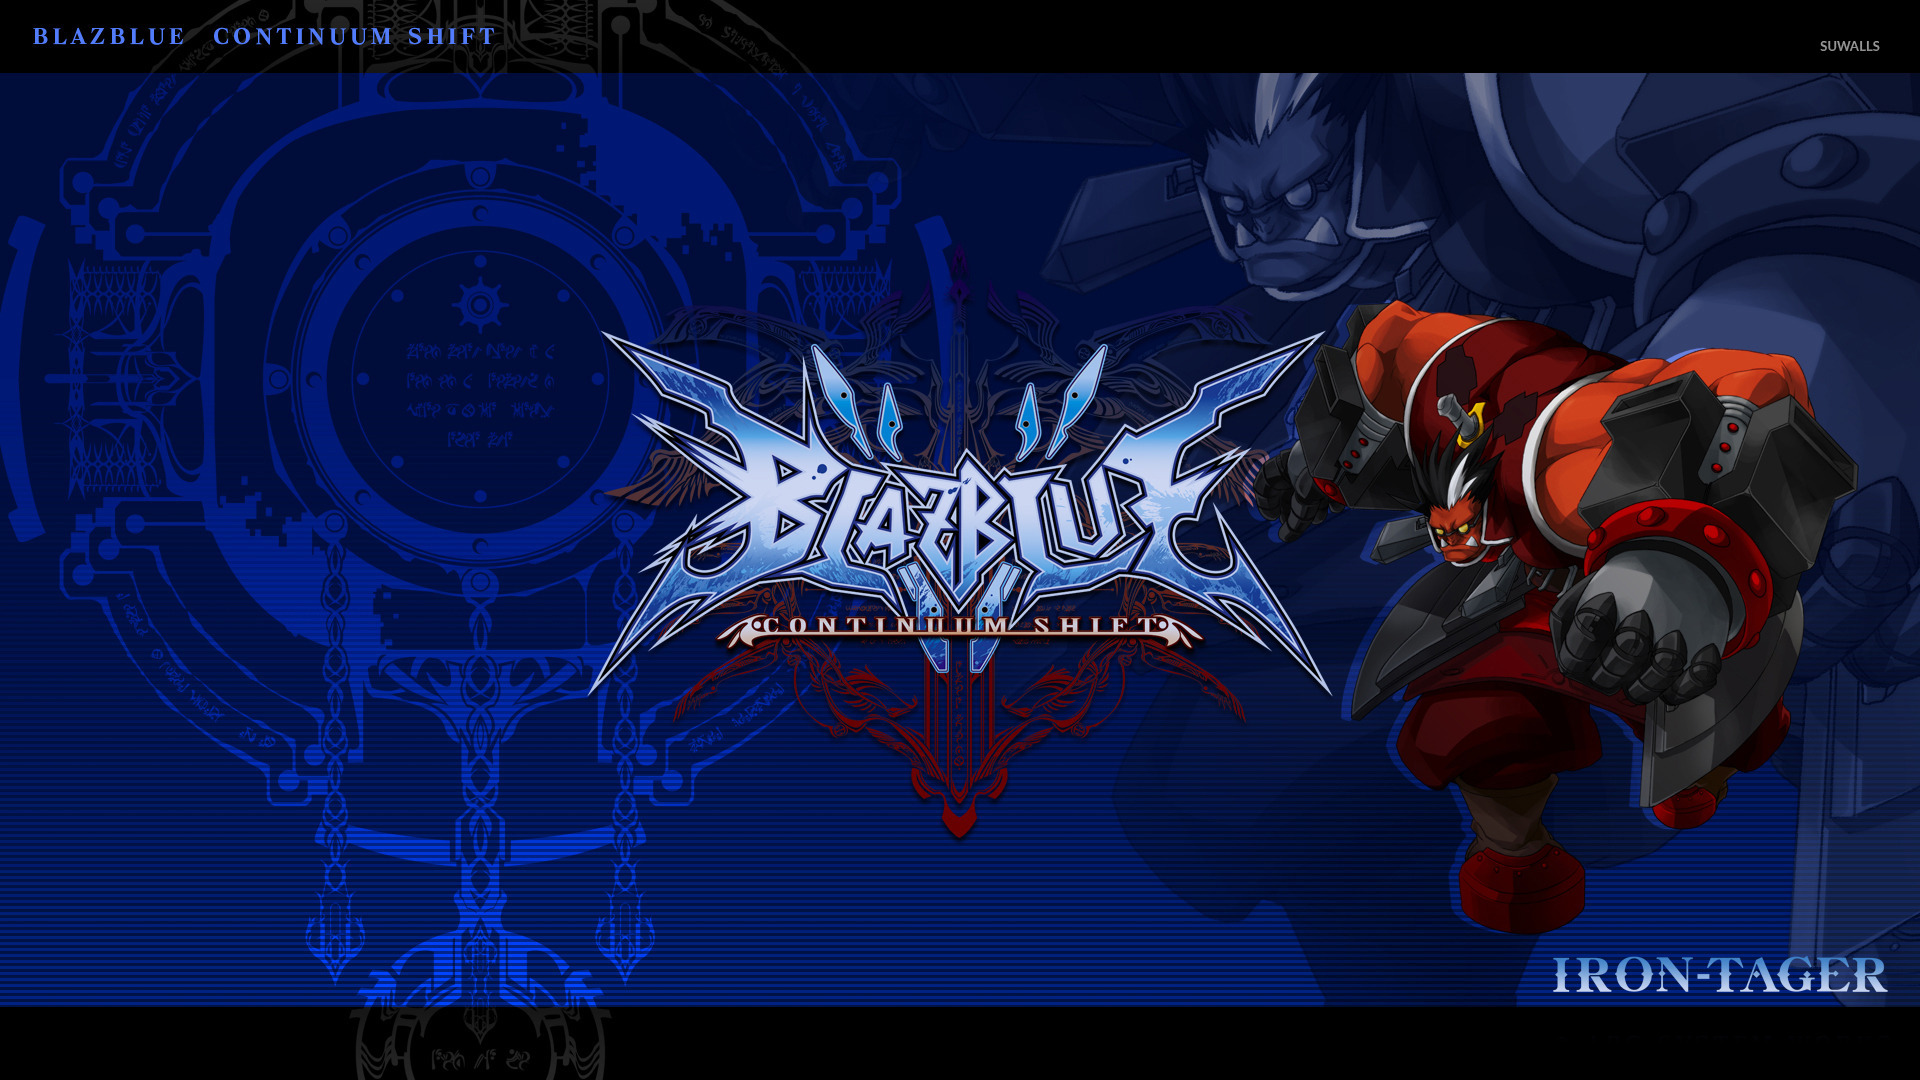 Iron Tager Blazblue Continuum Shift Wallpaper Game Wallpapers 33237